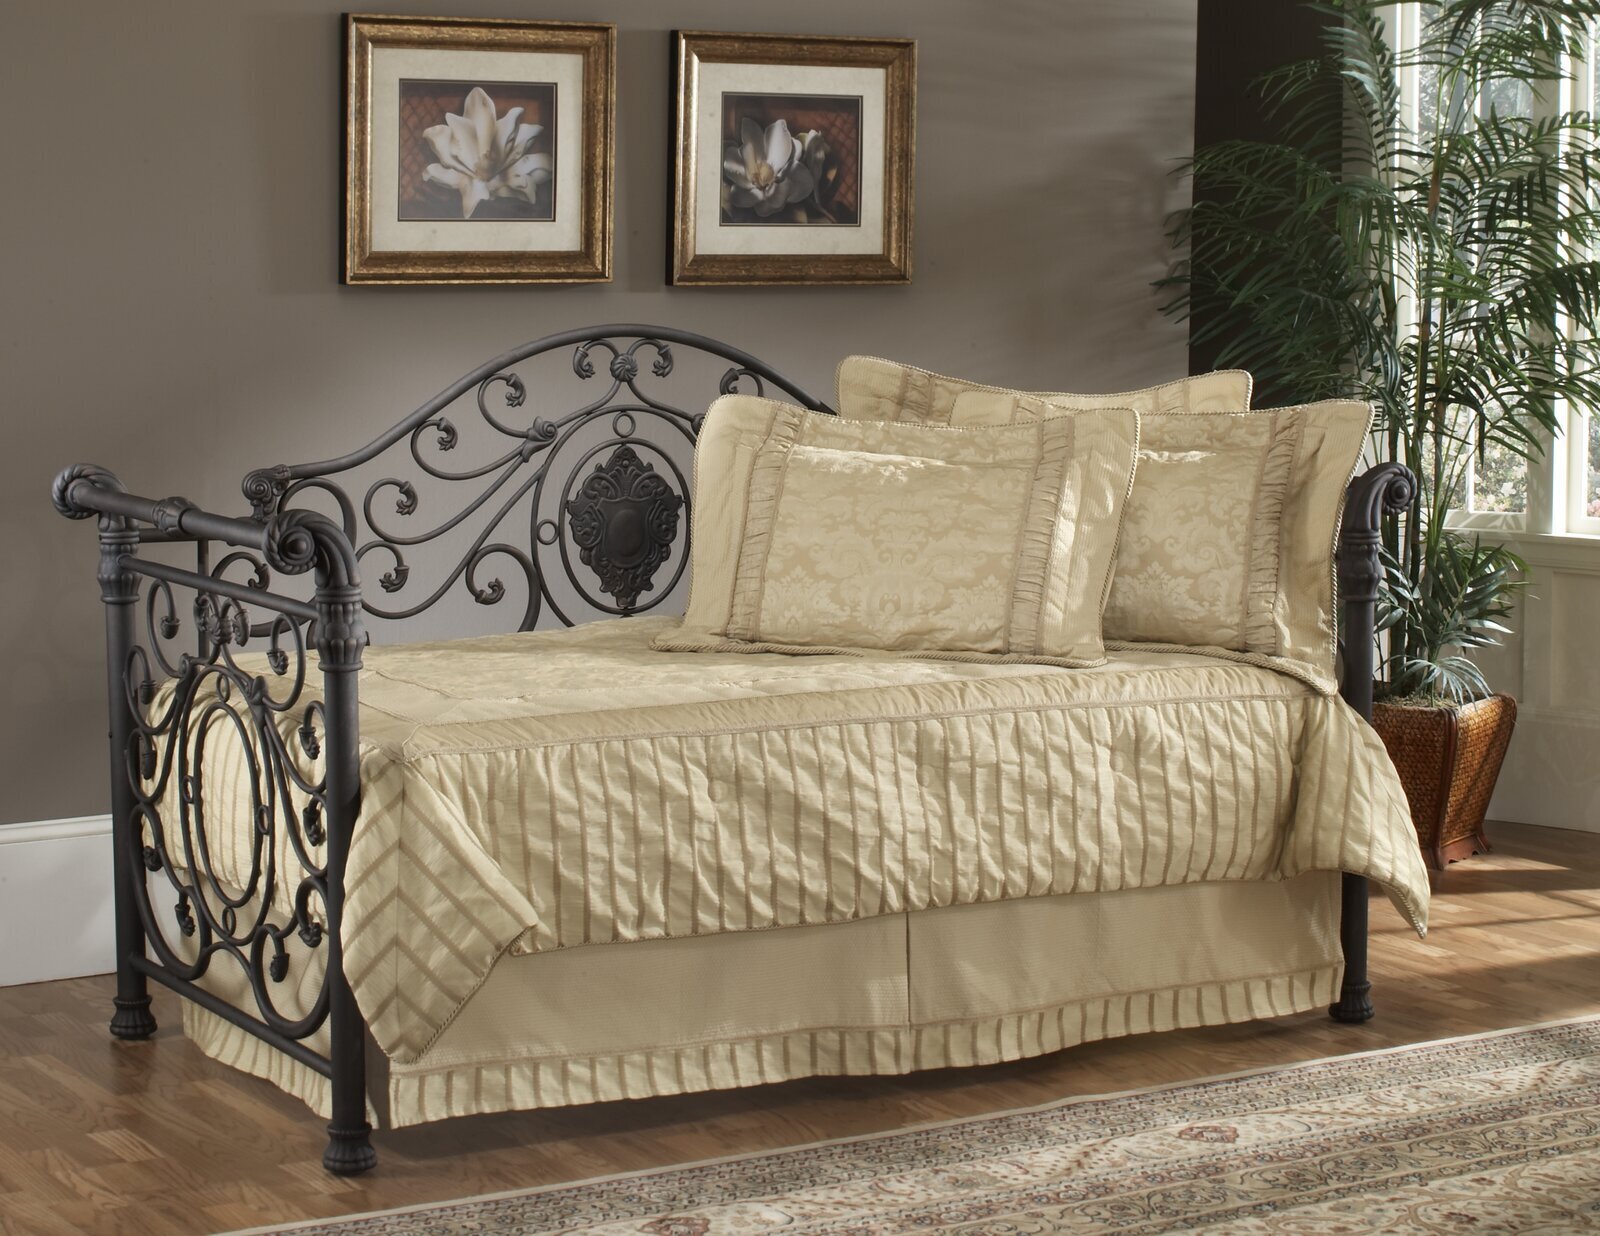 Daybed with Scrollwork